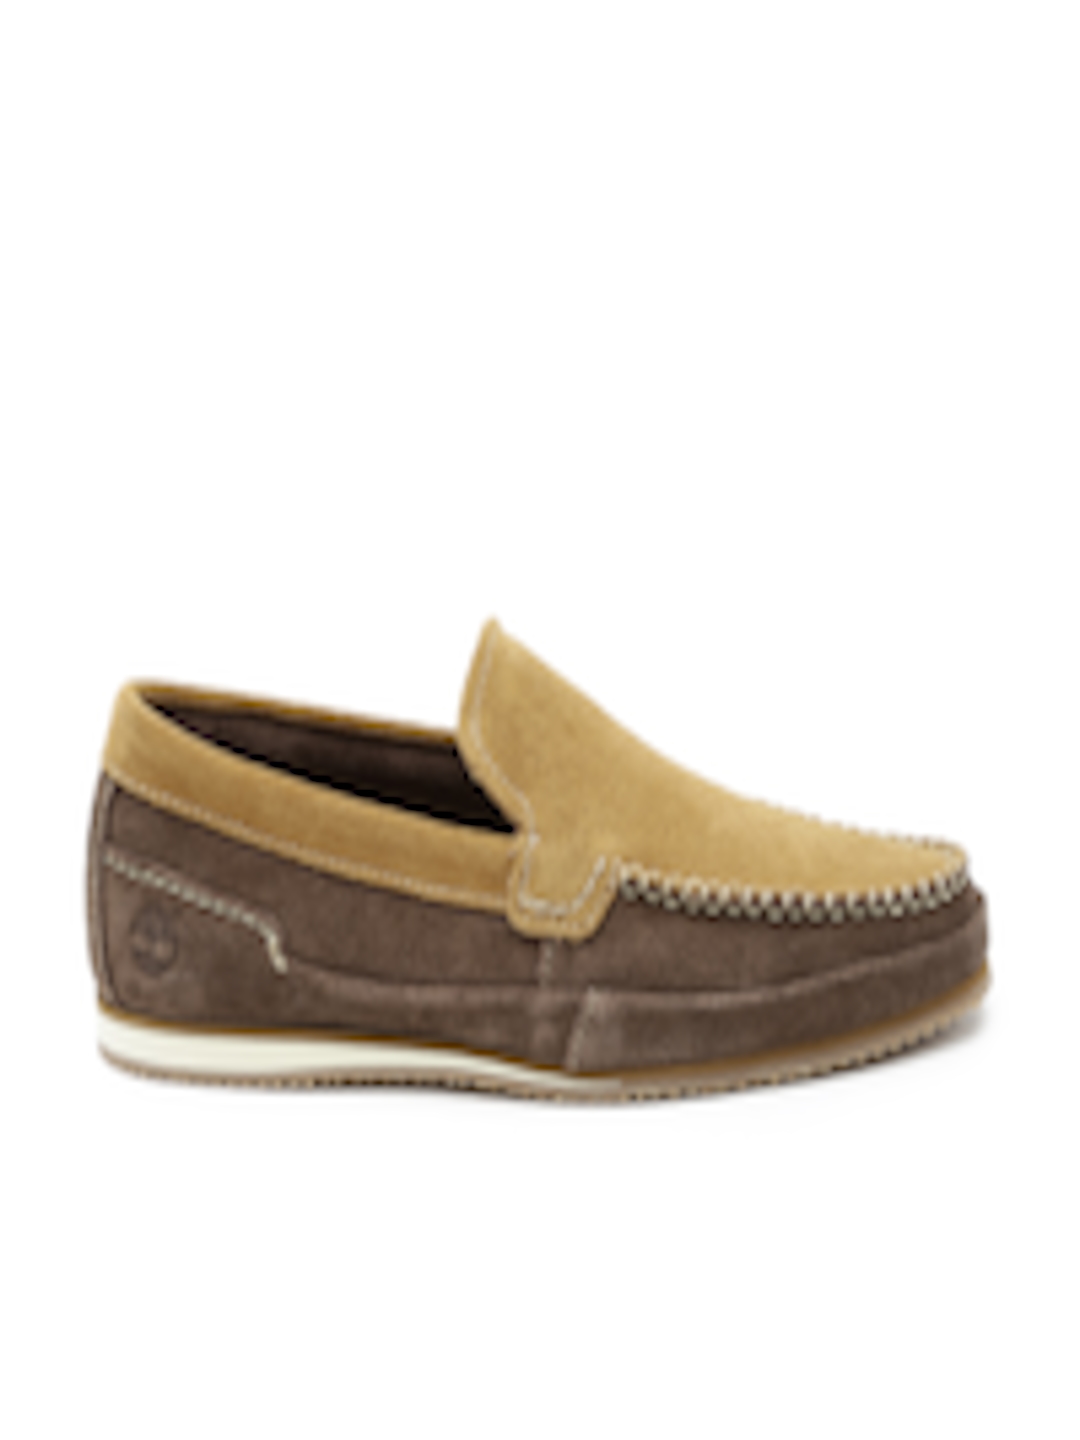 Buy Timberland Men Brown Suede Slip Ons - Casual Shoes for Men 1425649 ...